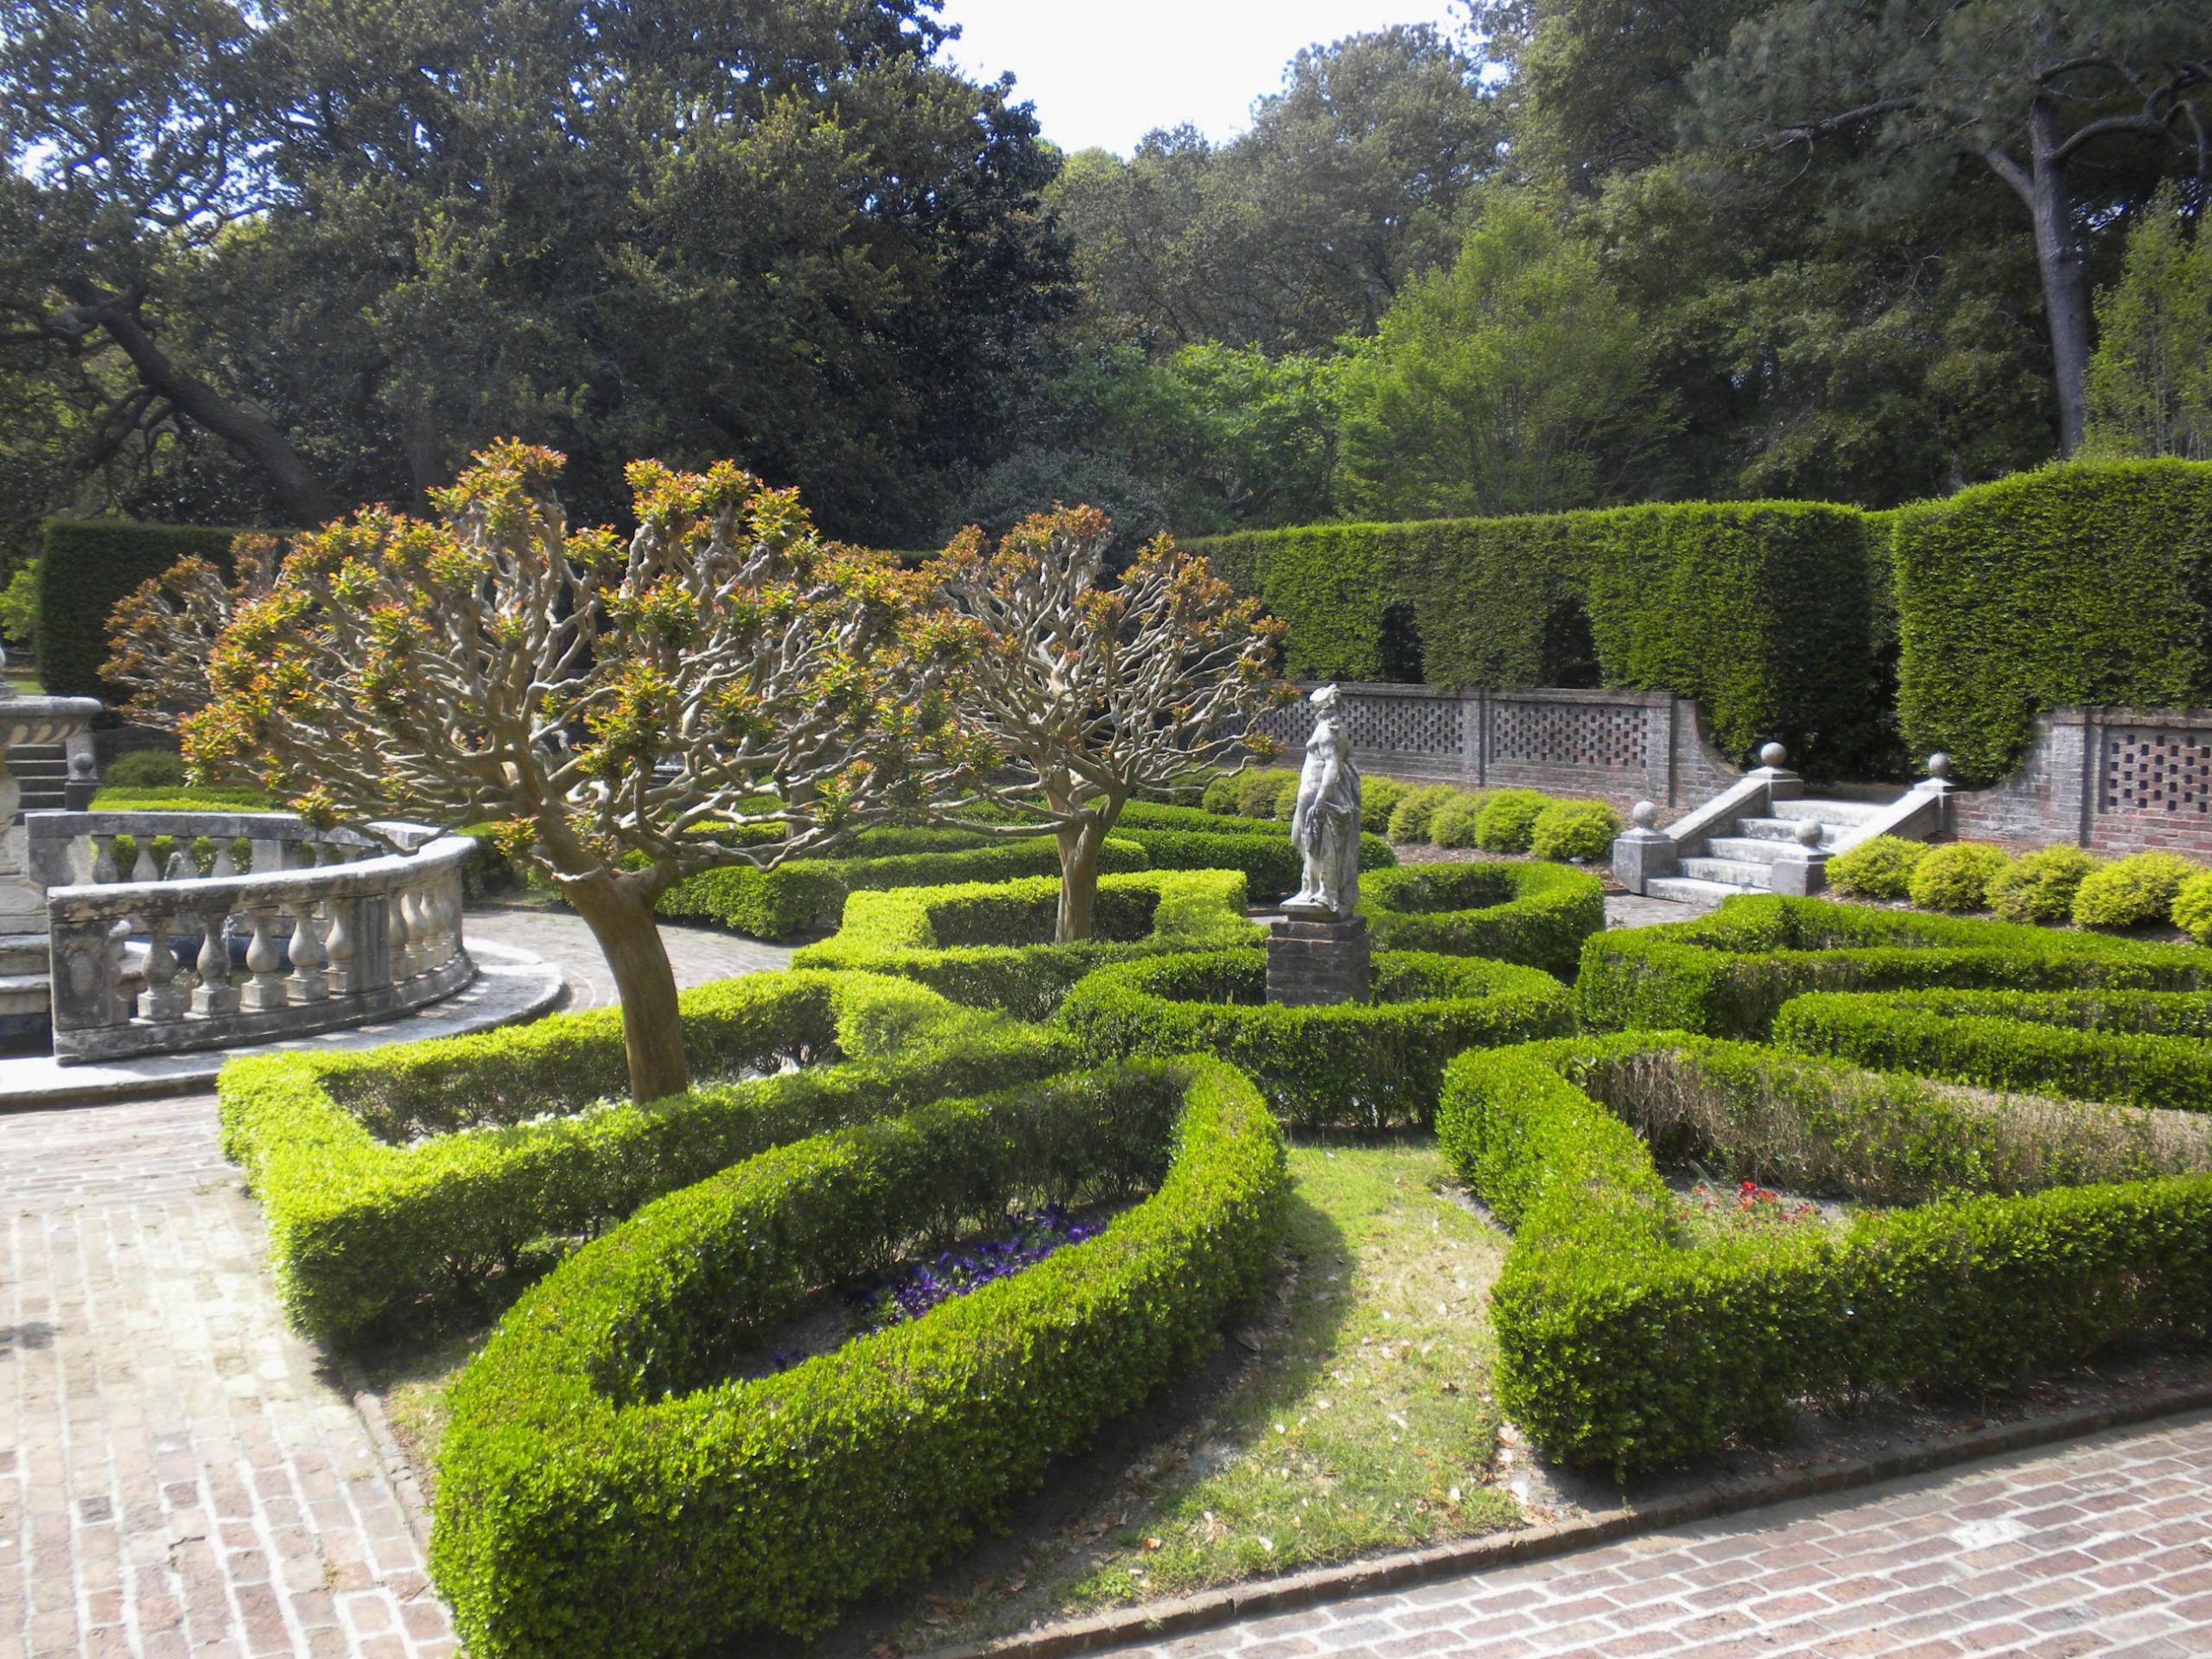 Experience the Elizabethan Garden in Manteo in the Outer Banks